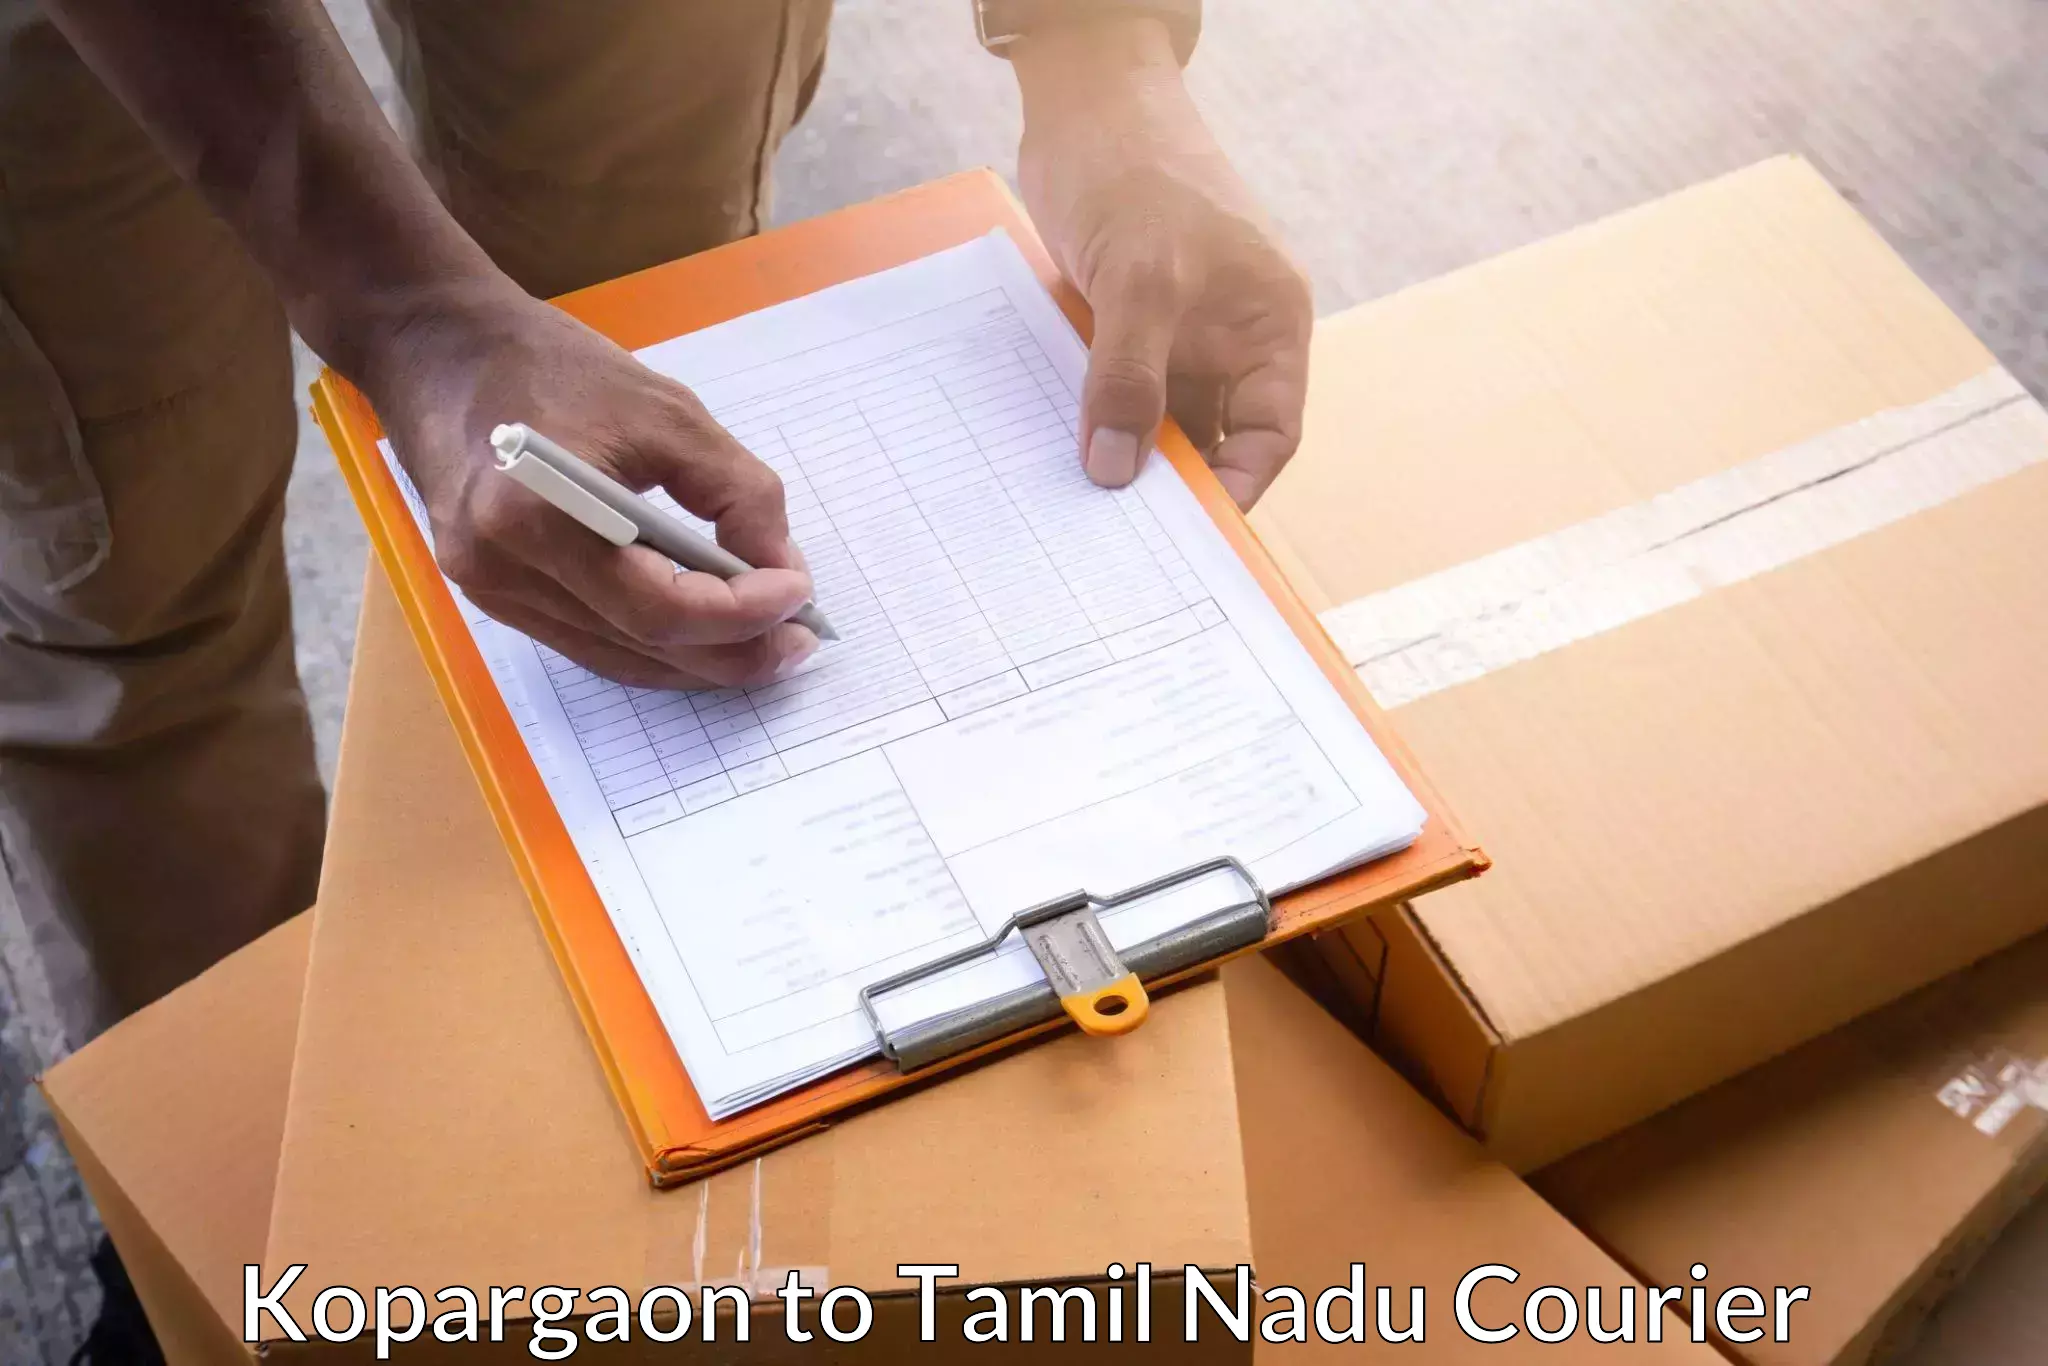 Modern courier technology Kopargaon to Sri Ramachandra Institute of Higher Education and Research Chennai